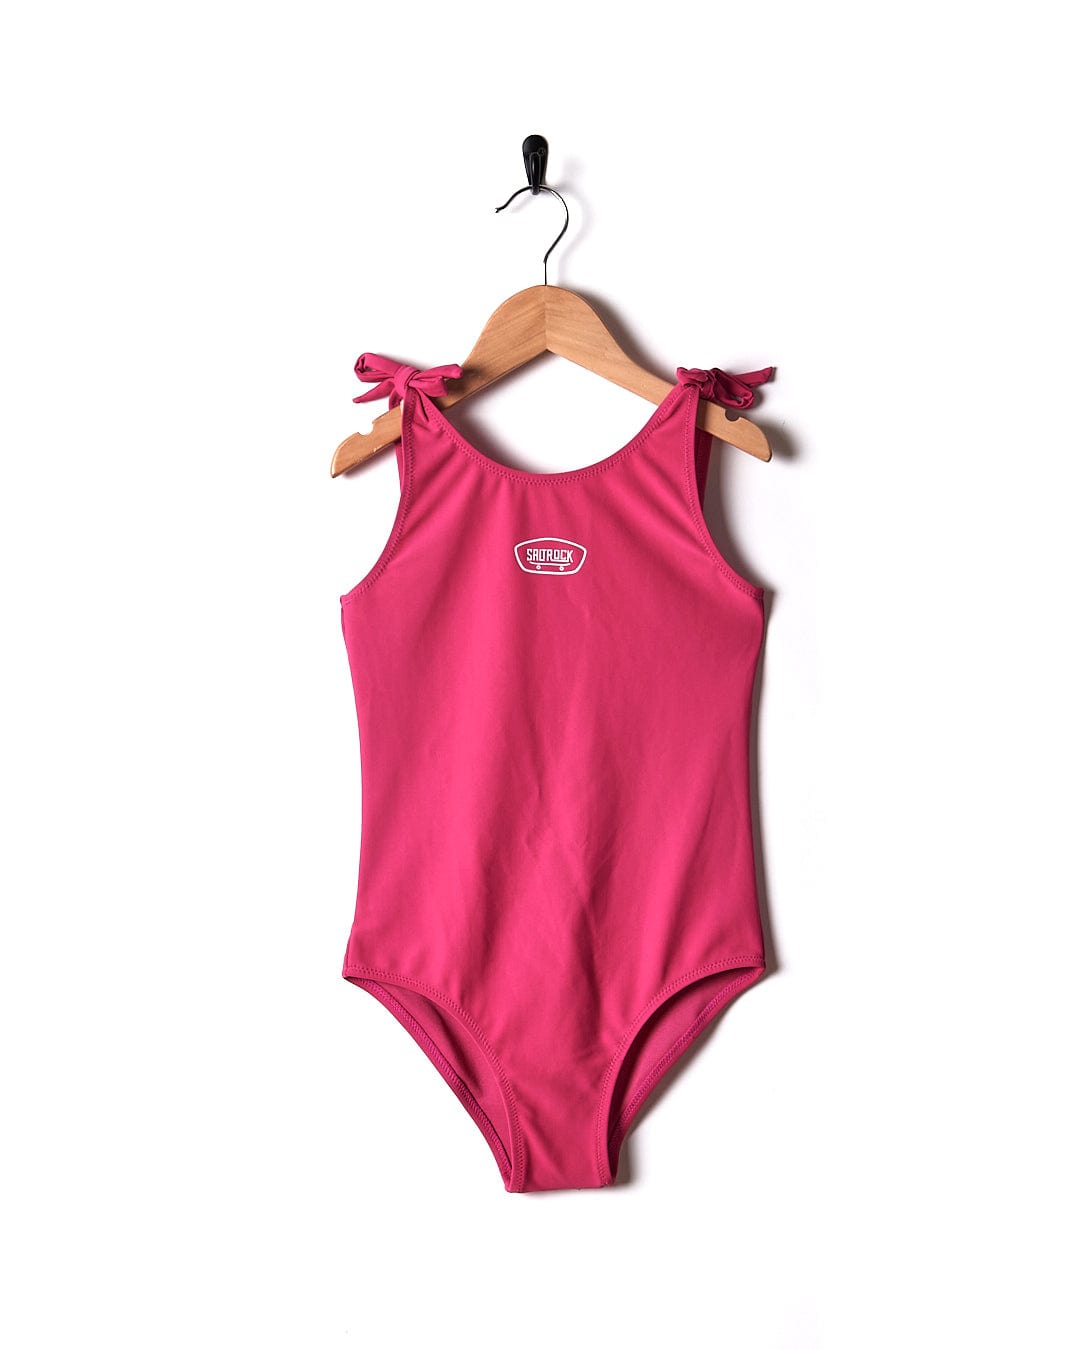 A Sunny - Kids Swimsuit - Pink from Saltrock hanging on a wooden hanger.